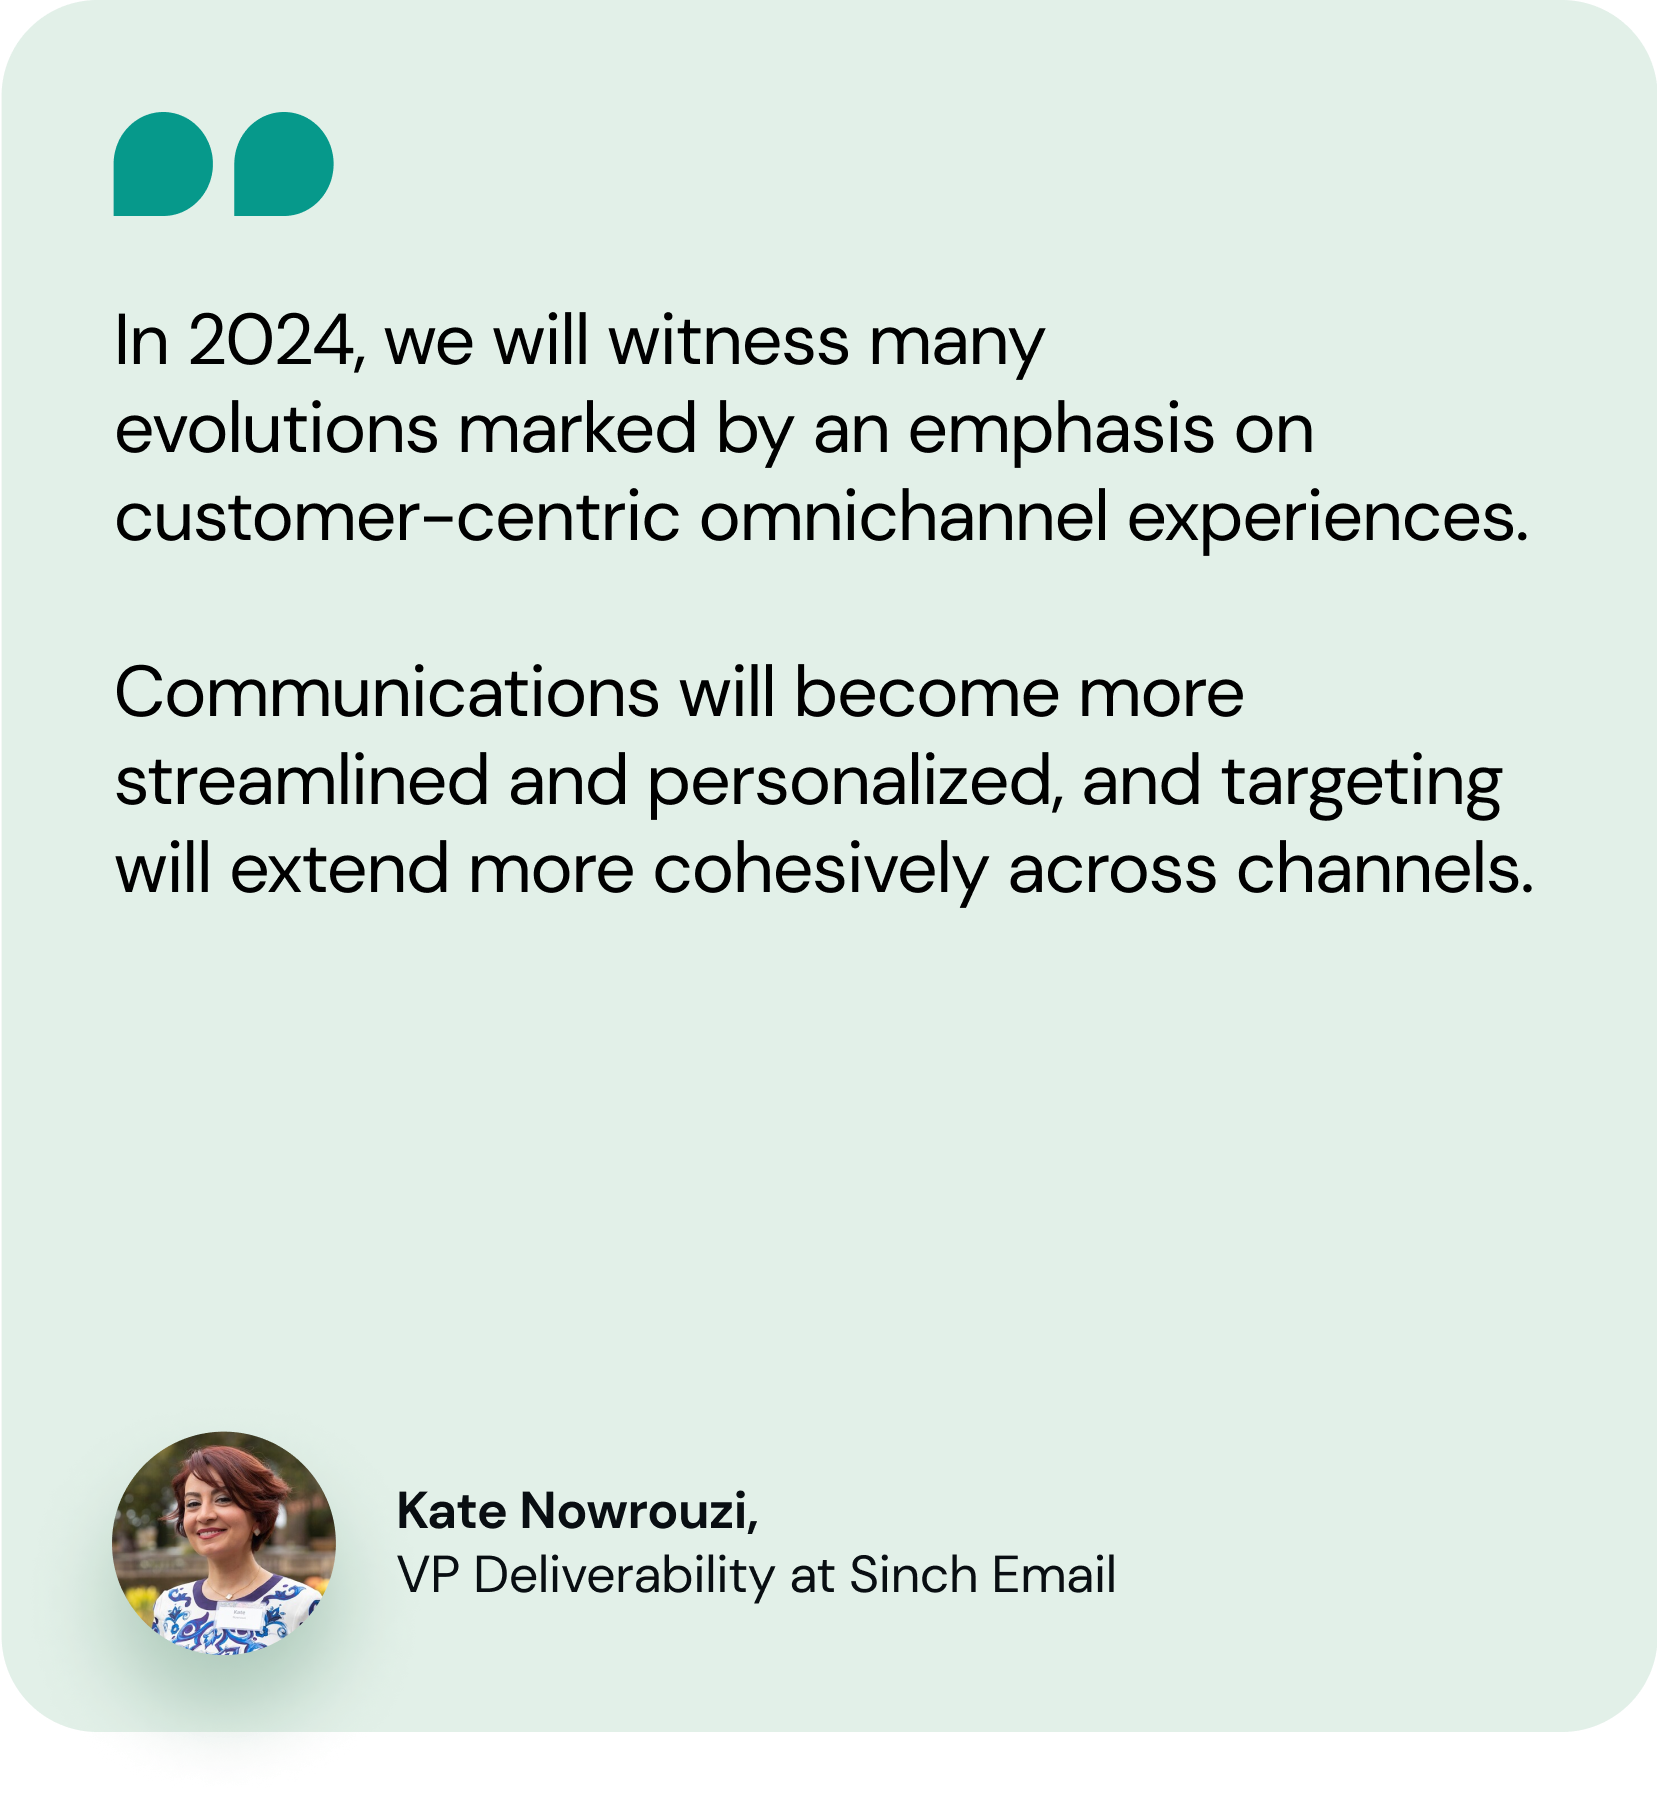 Kate Nowrouzi, VP Deliverability at Sinch Email on omnichannel strategy